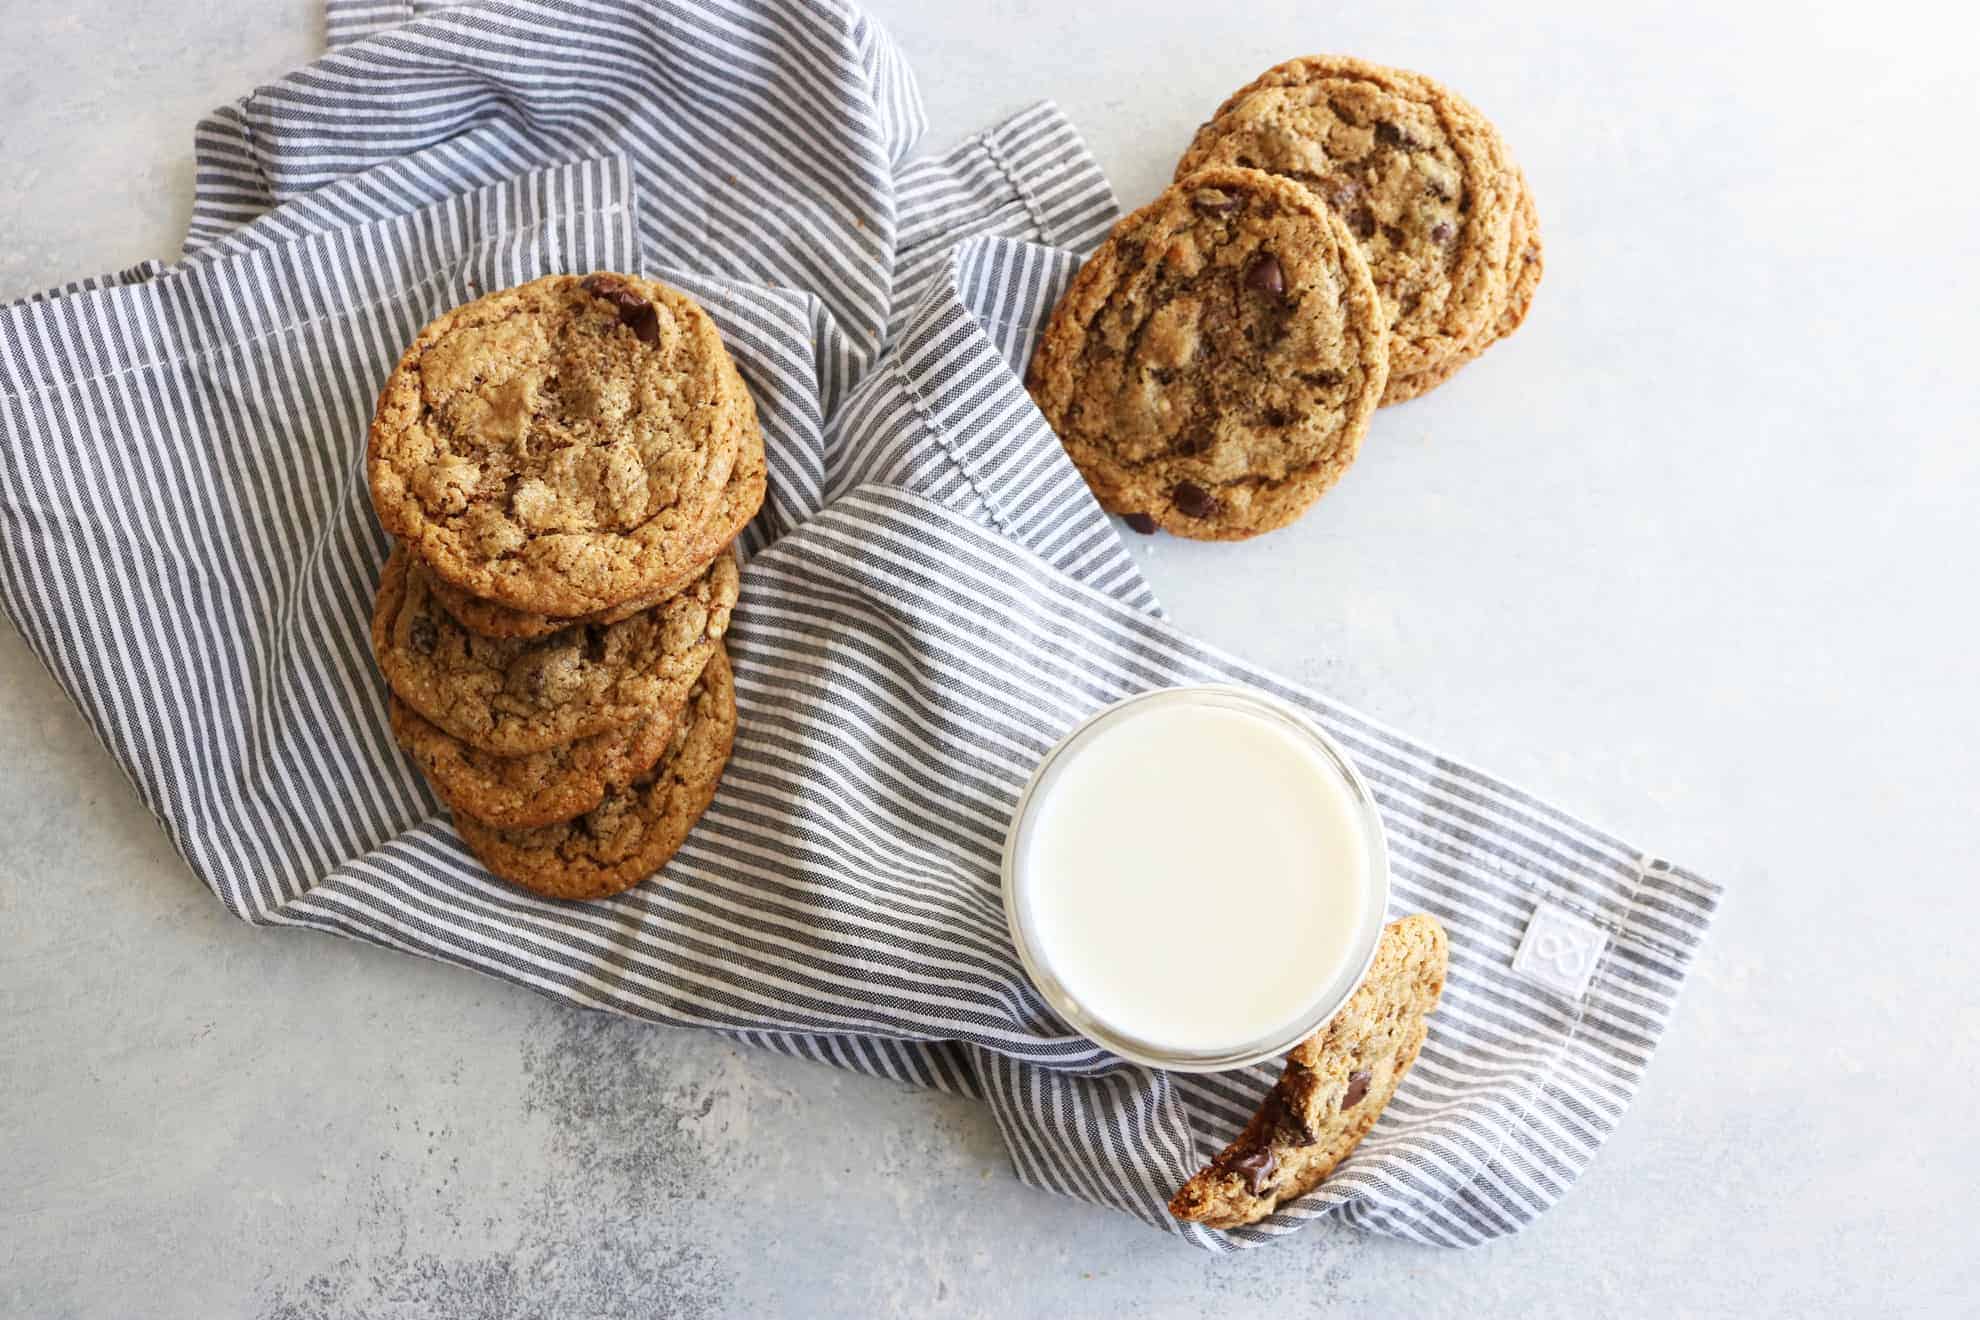 This is an overhead image of a glass of milk with a cookie leaning against it. The cookie has a bite taken out. More cookies are off to the side and around the glass of milk. The glass sits on a white and grey surface with a grey pinstripe tea towel. 